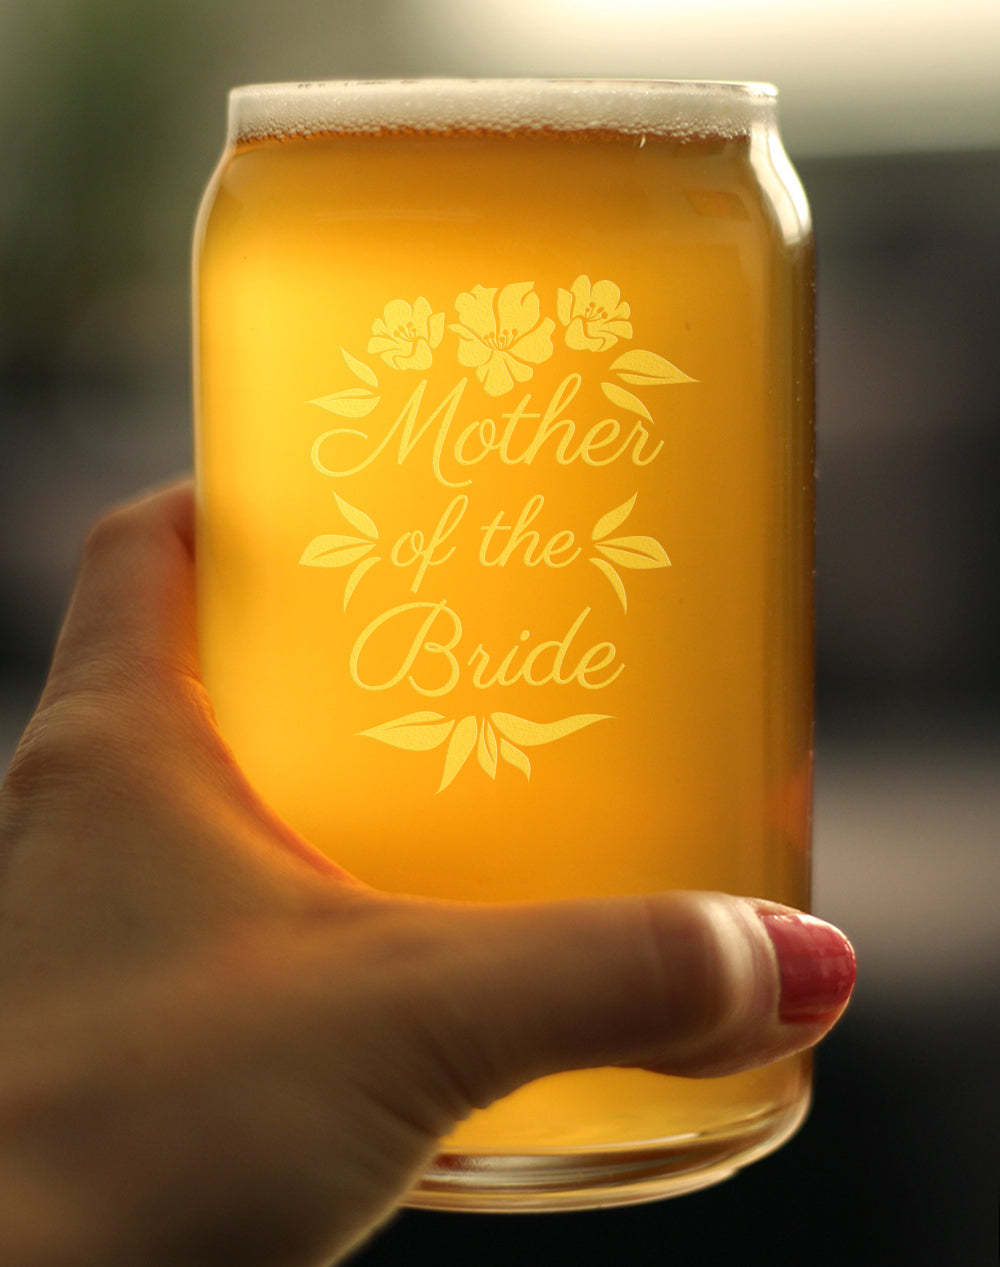 Mother of the Bride Beer Can Pint Glass - Unique Wedding Gift for Soon to Be Mother-in-Law - Cute Engraved Wedding Cup Gift